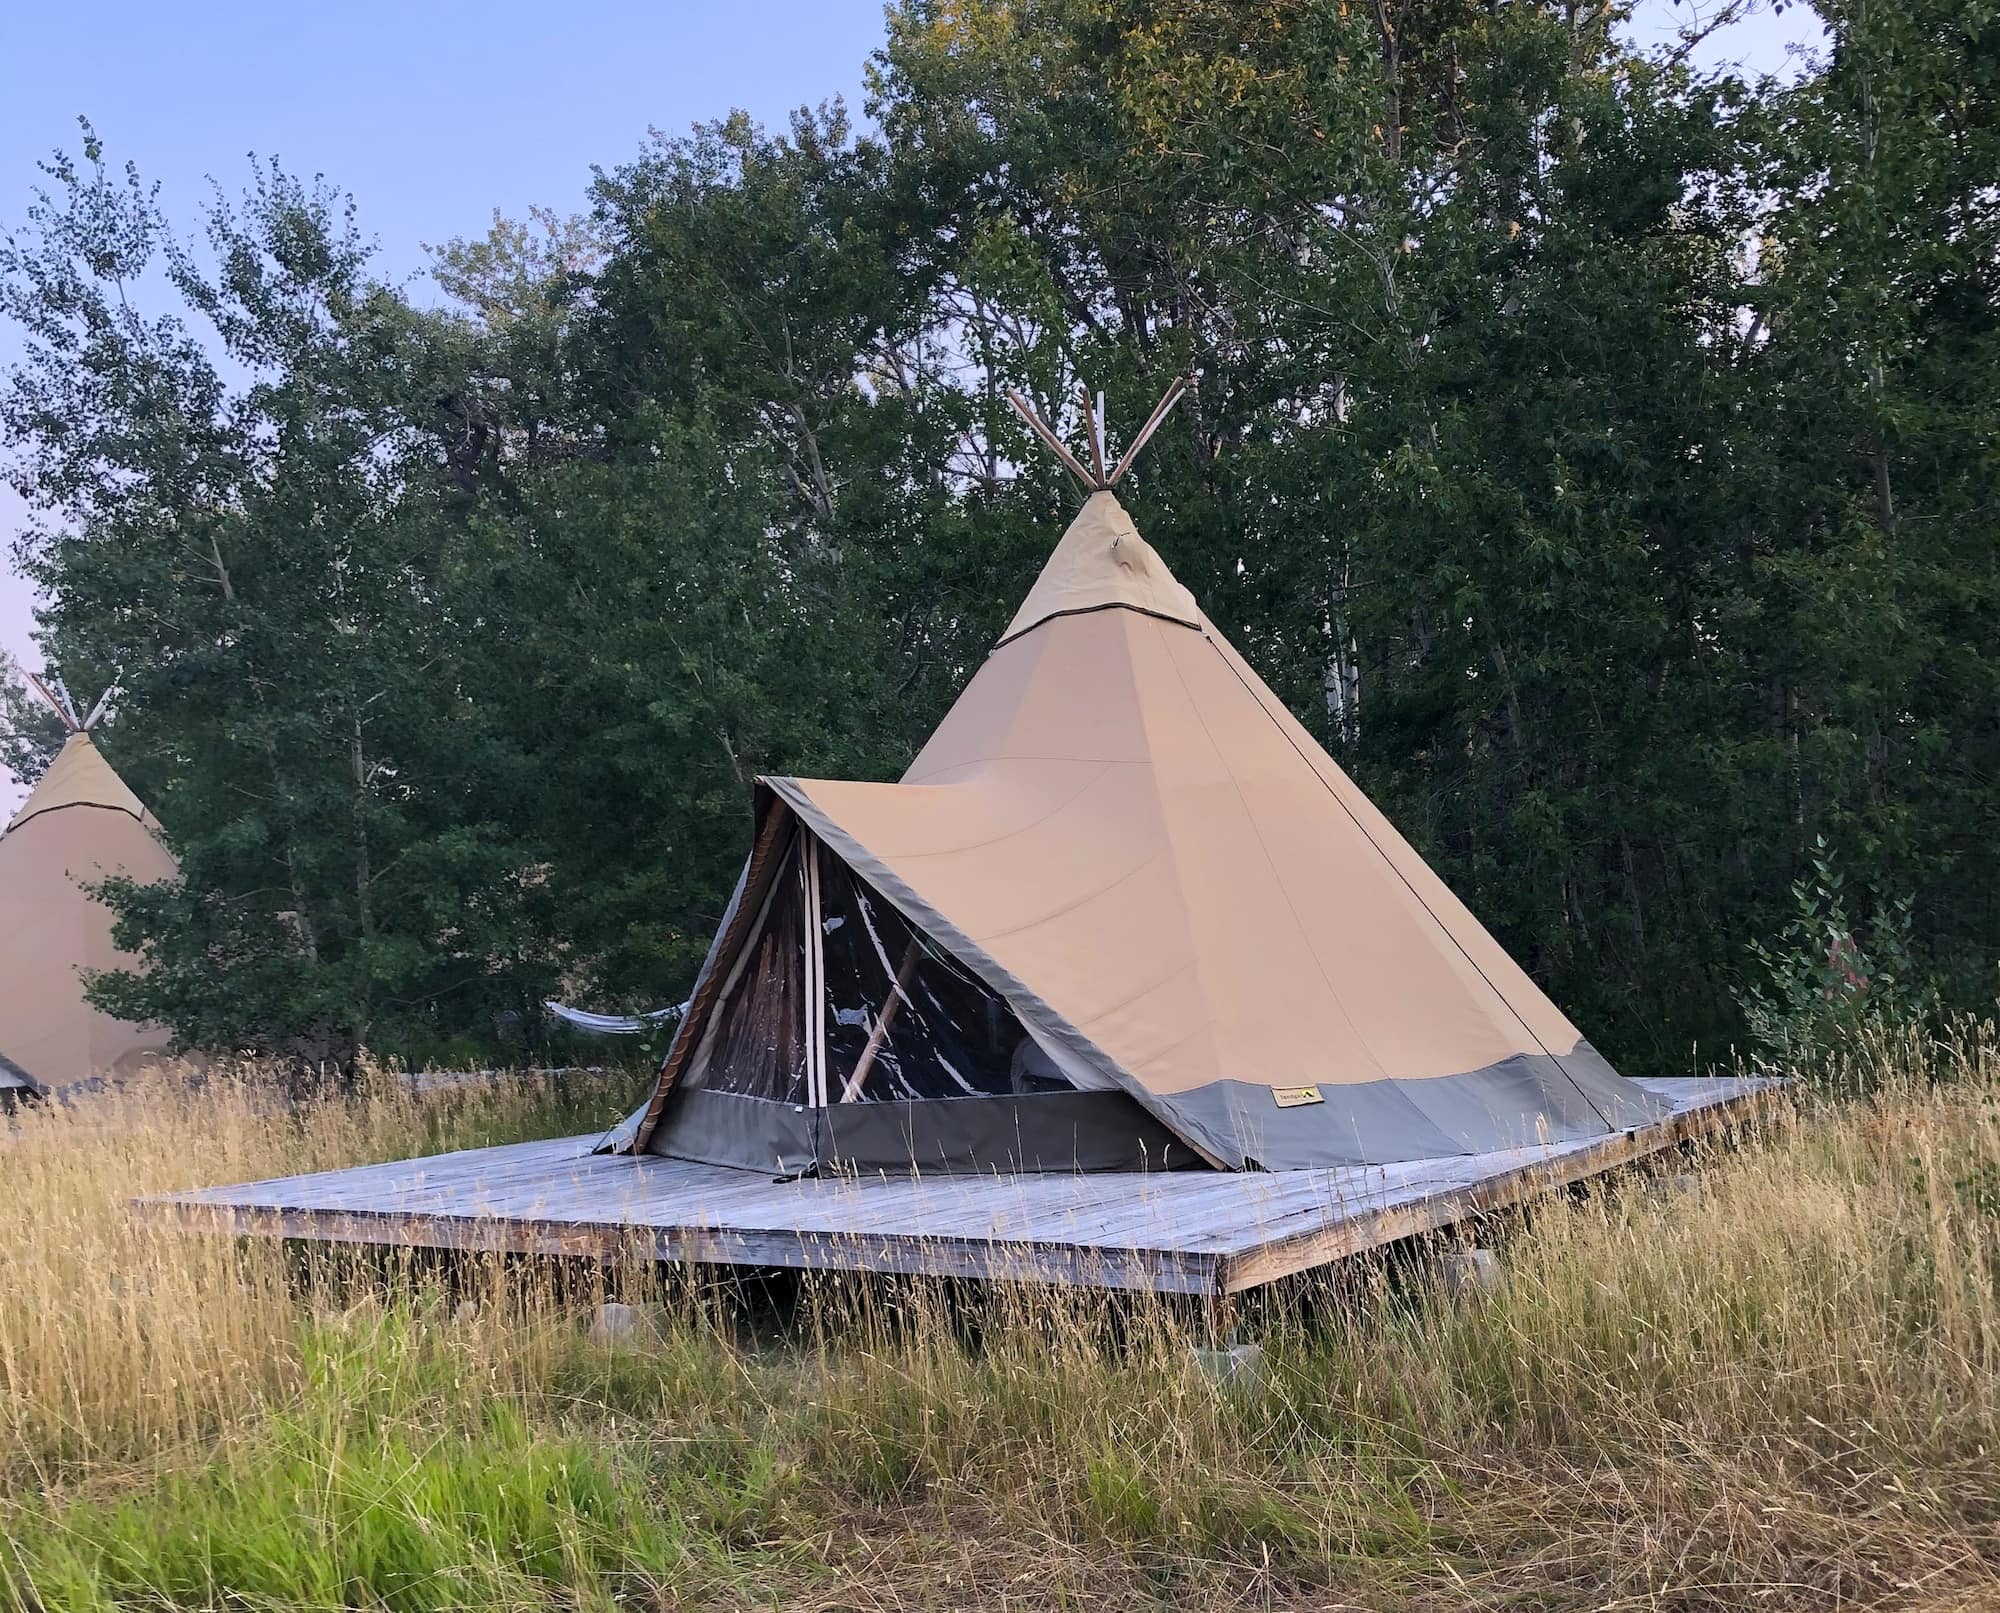 Glamping in a tipi